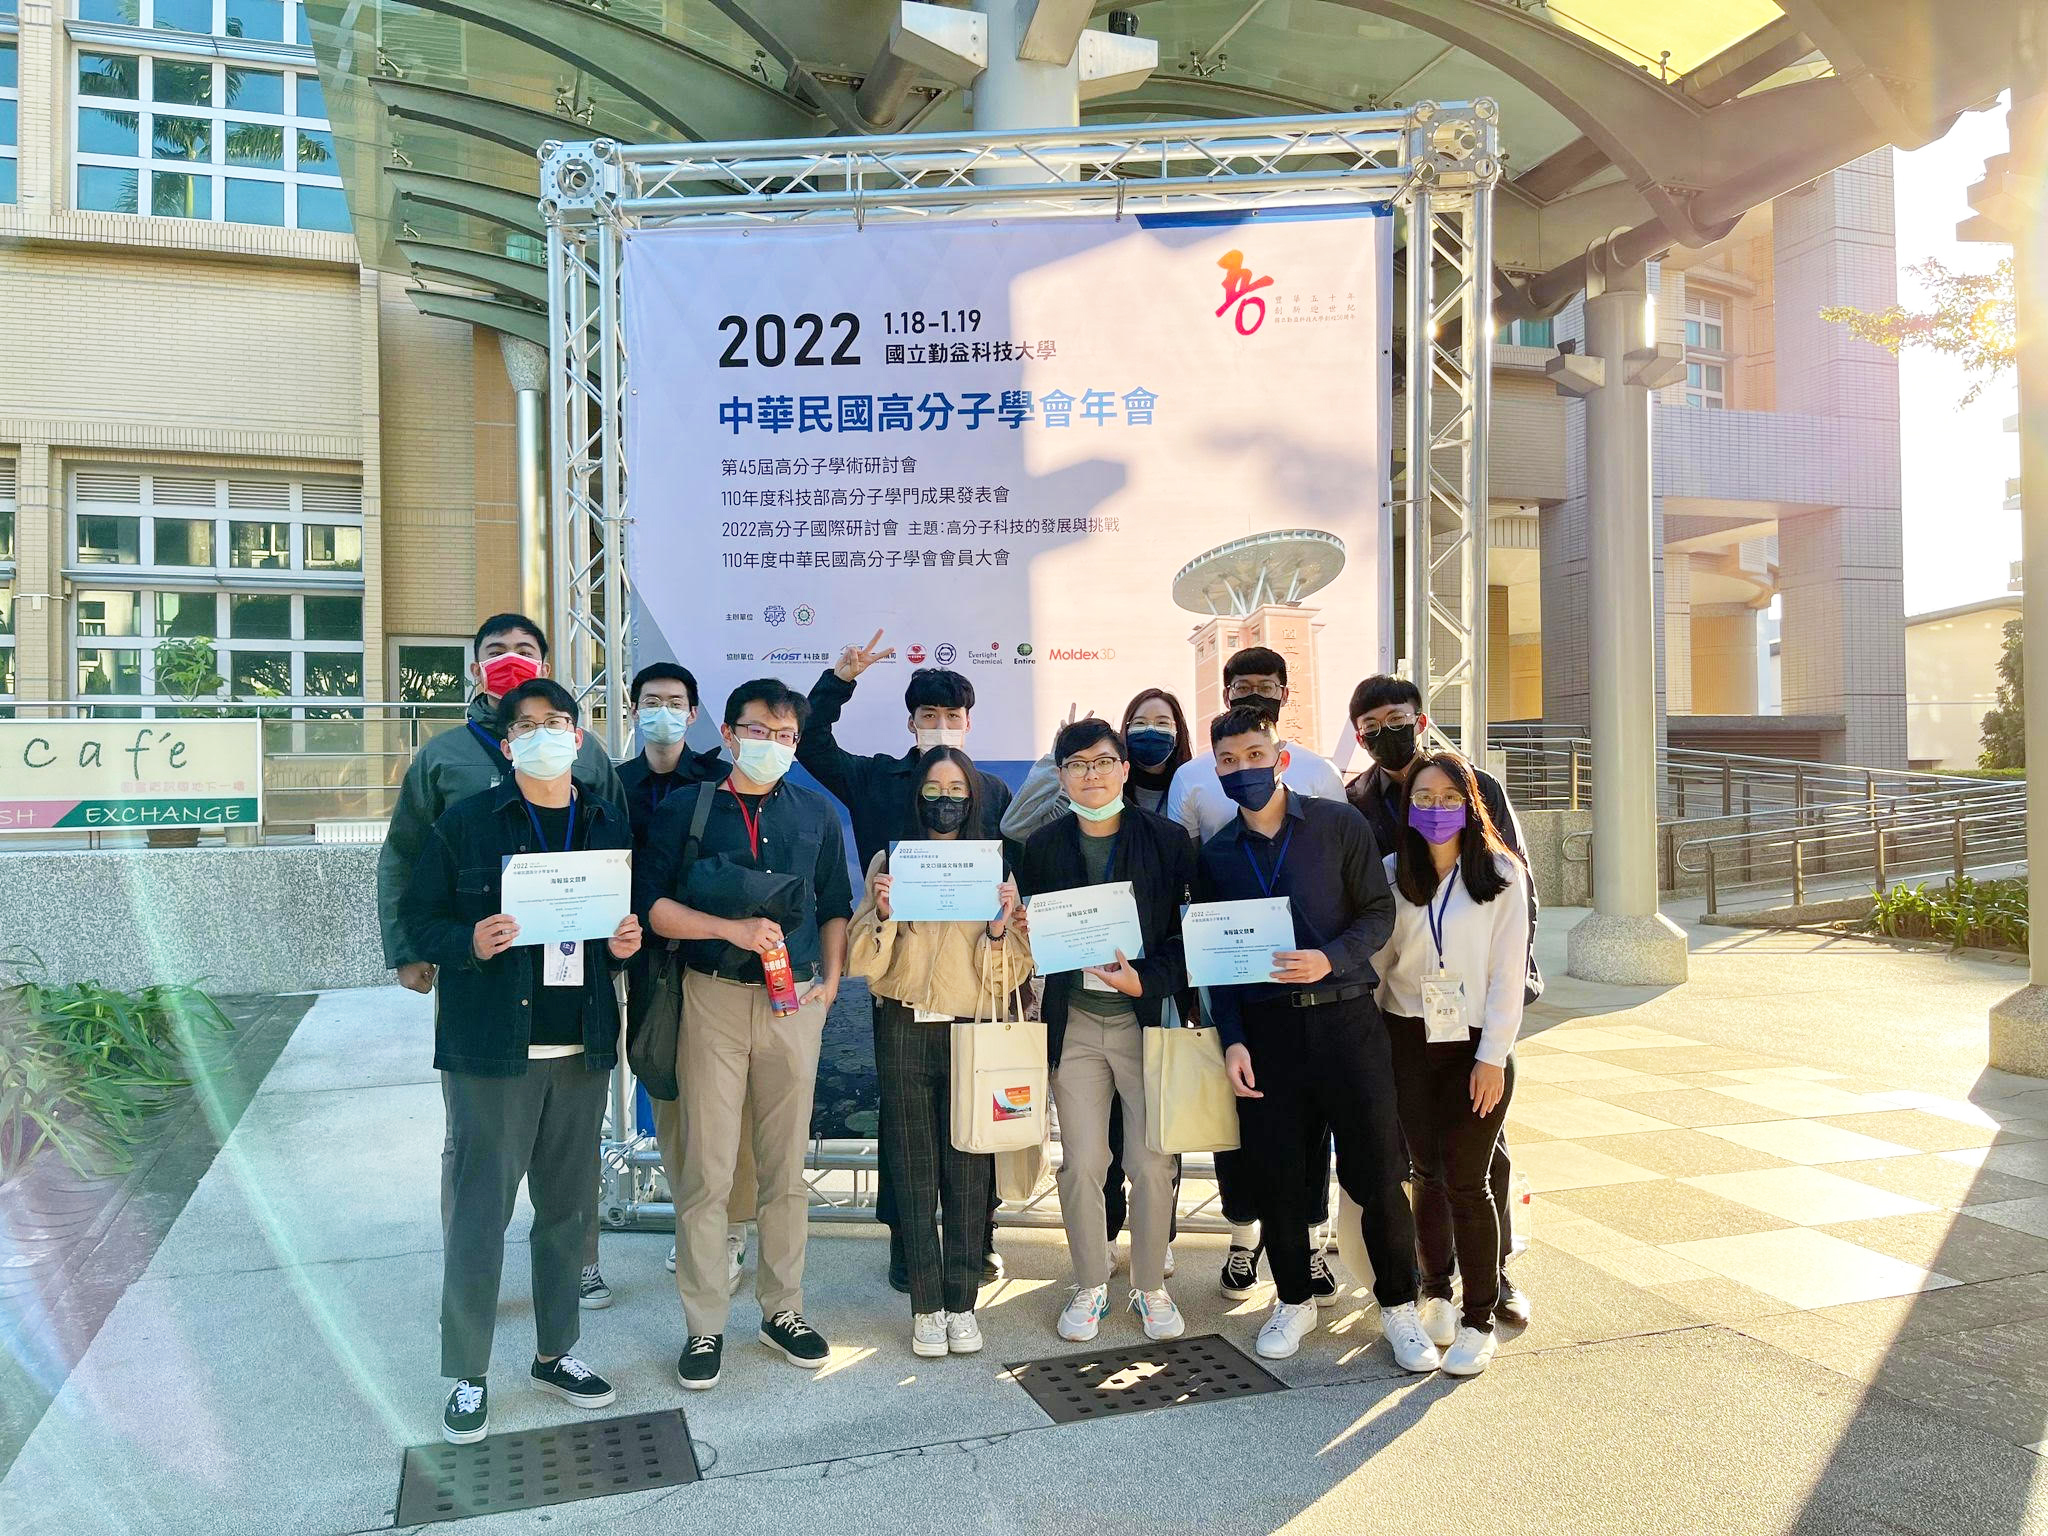 Professor Yu (second from left in front) and his students